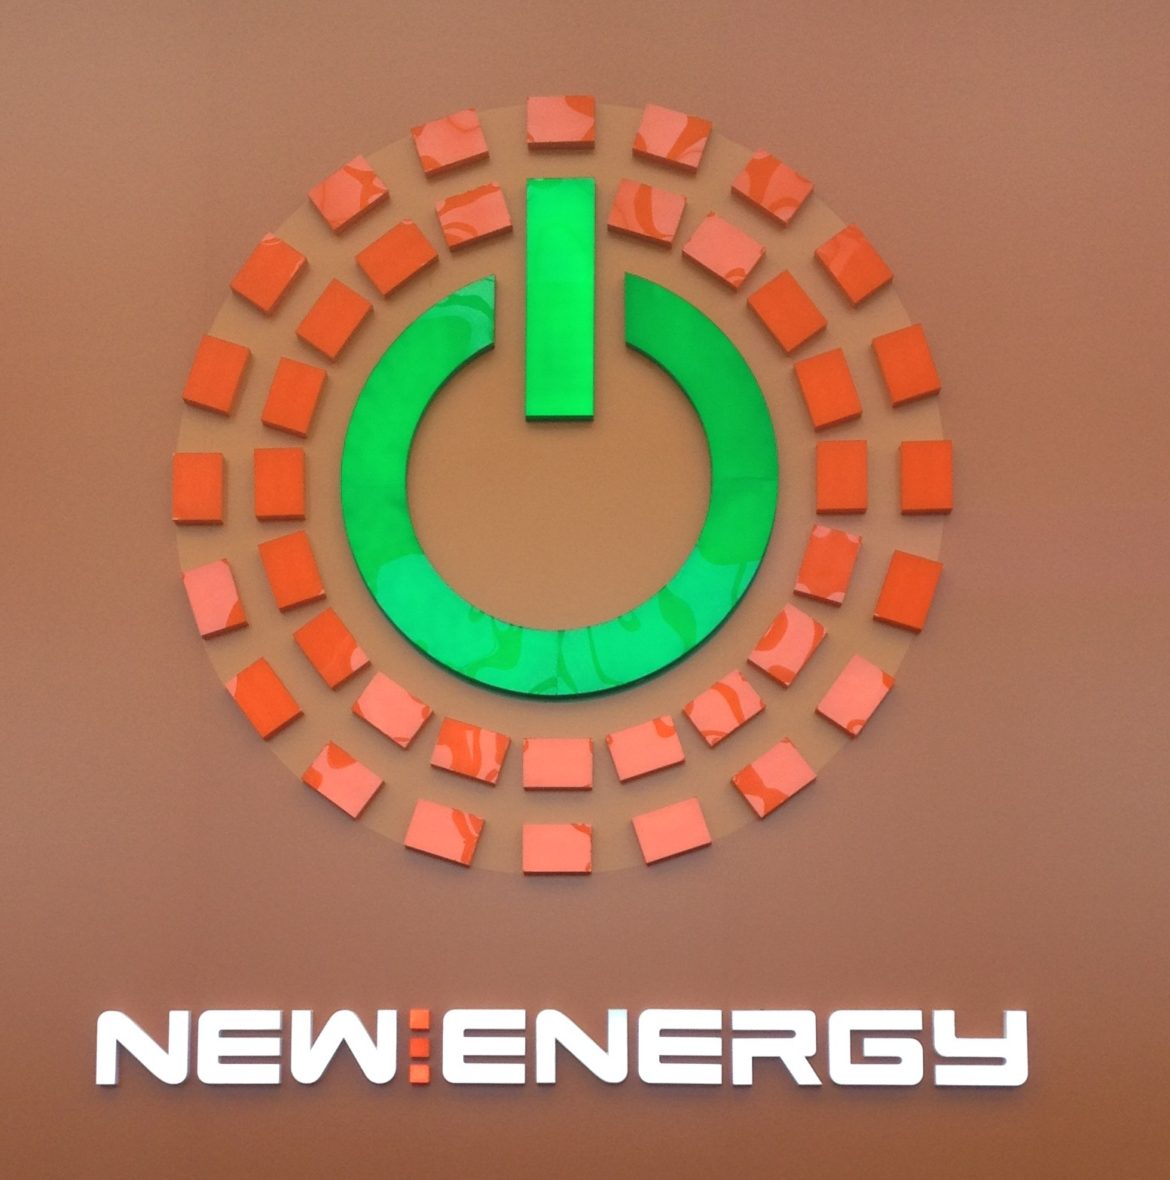 EnergySolaris in TOP 100 global startups to pitch at NEWENERGY Astana!